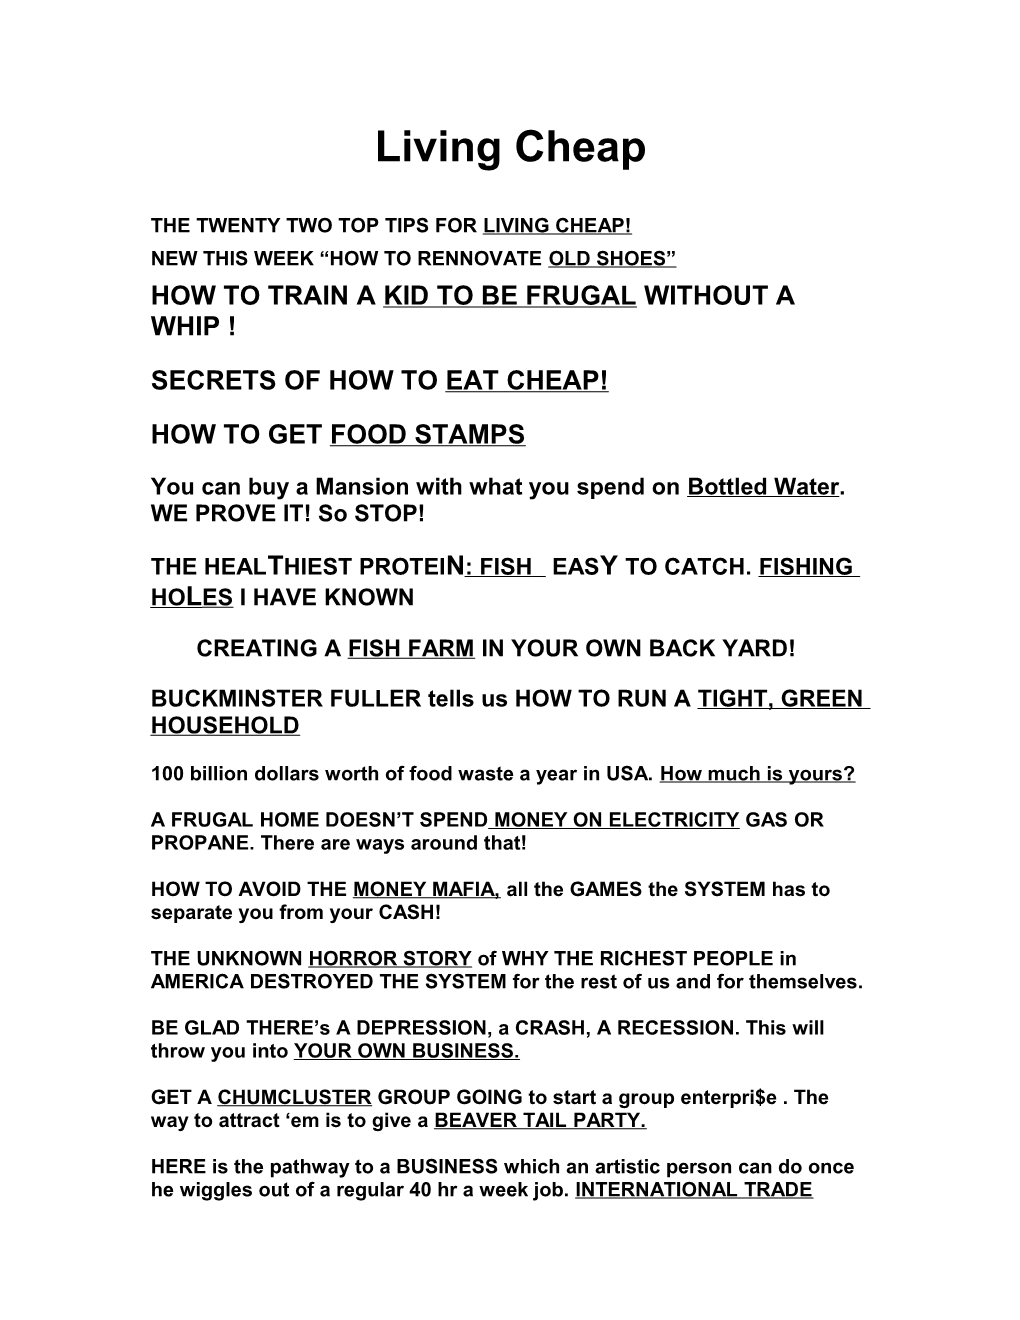 The Twenty Two Top Tips for Living Cheap!